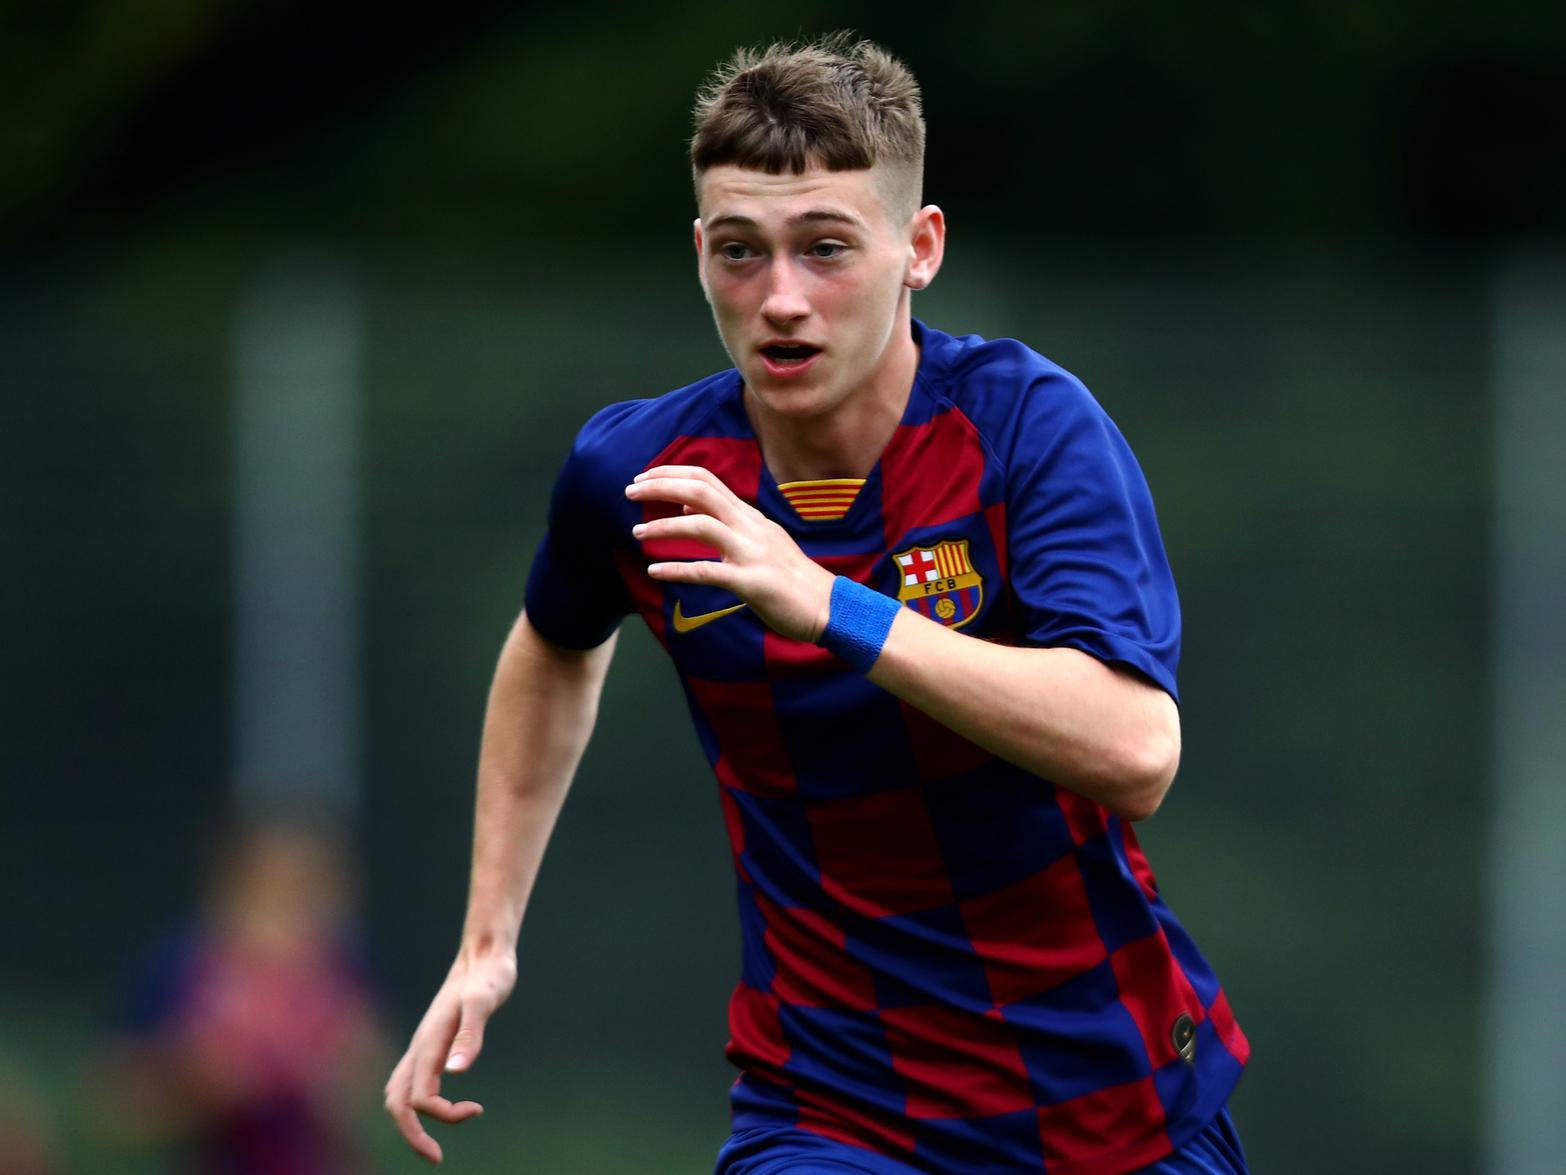 West Brom are set to approach FIFA this week to urge the football governing body to act against FC Barcelona to receive unpaid compensation for former academy player Louie Barry. (Various)